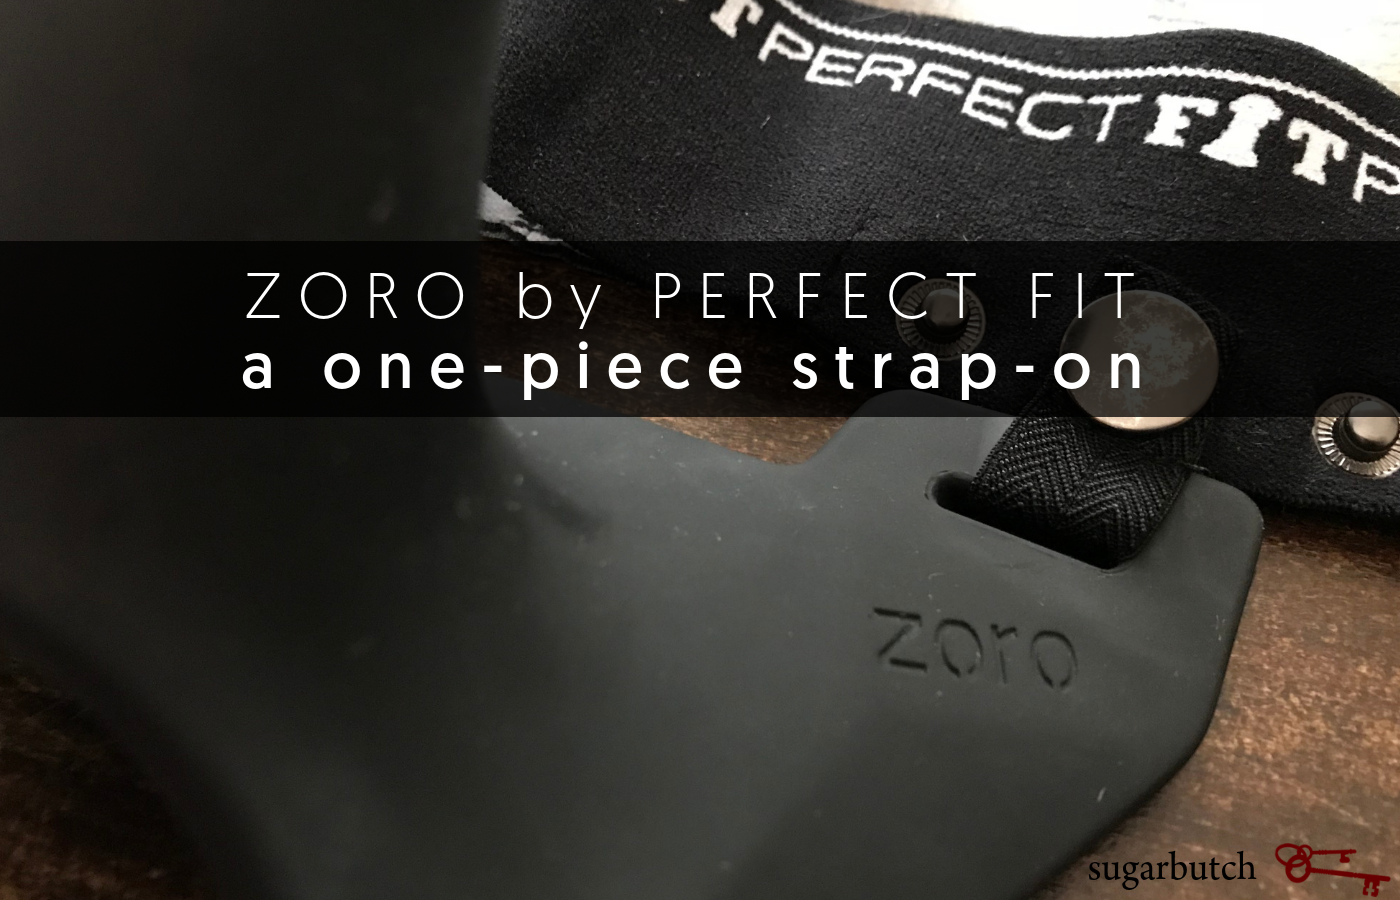 Cock Confidence: Zoro, by Perfect Fit